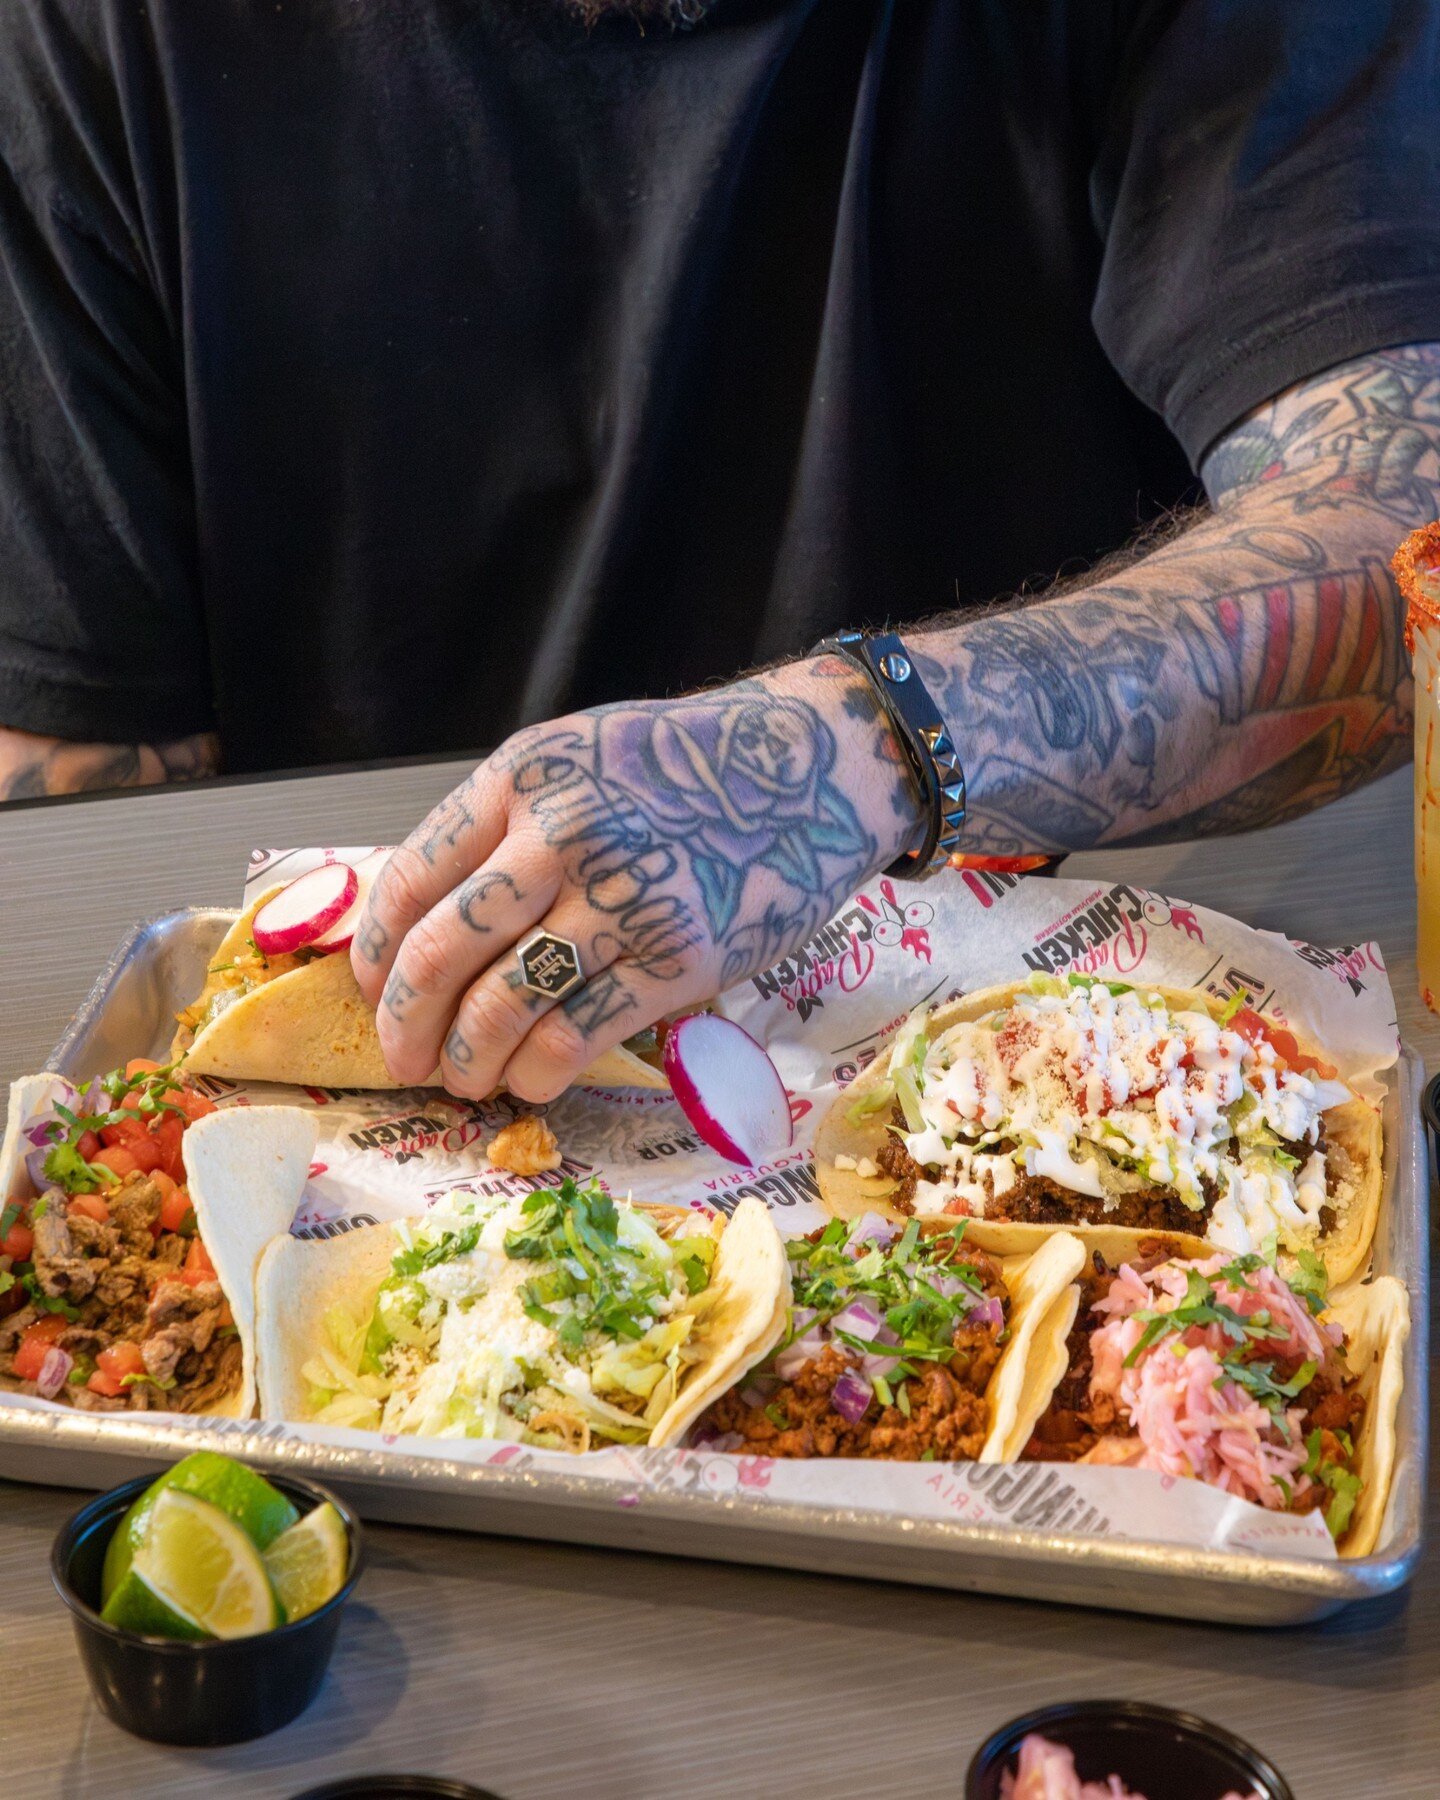 Tag your bestie who would finish this tray of tacos with you ⬇️

#chingontaqueria #bechingon #lelandnc #wilmingtonnc #taqueria #mexicanfood #comidamexicana #lelandfood #wilmingtonfoodie